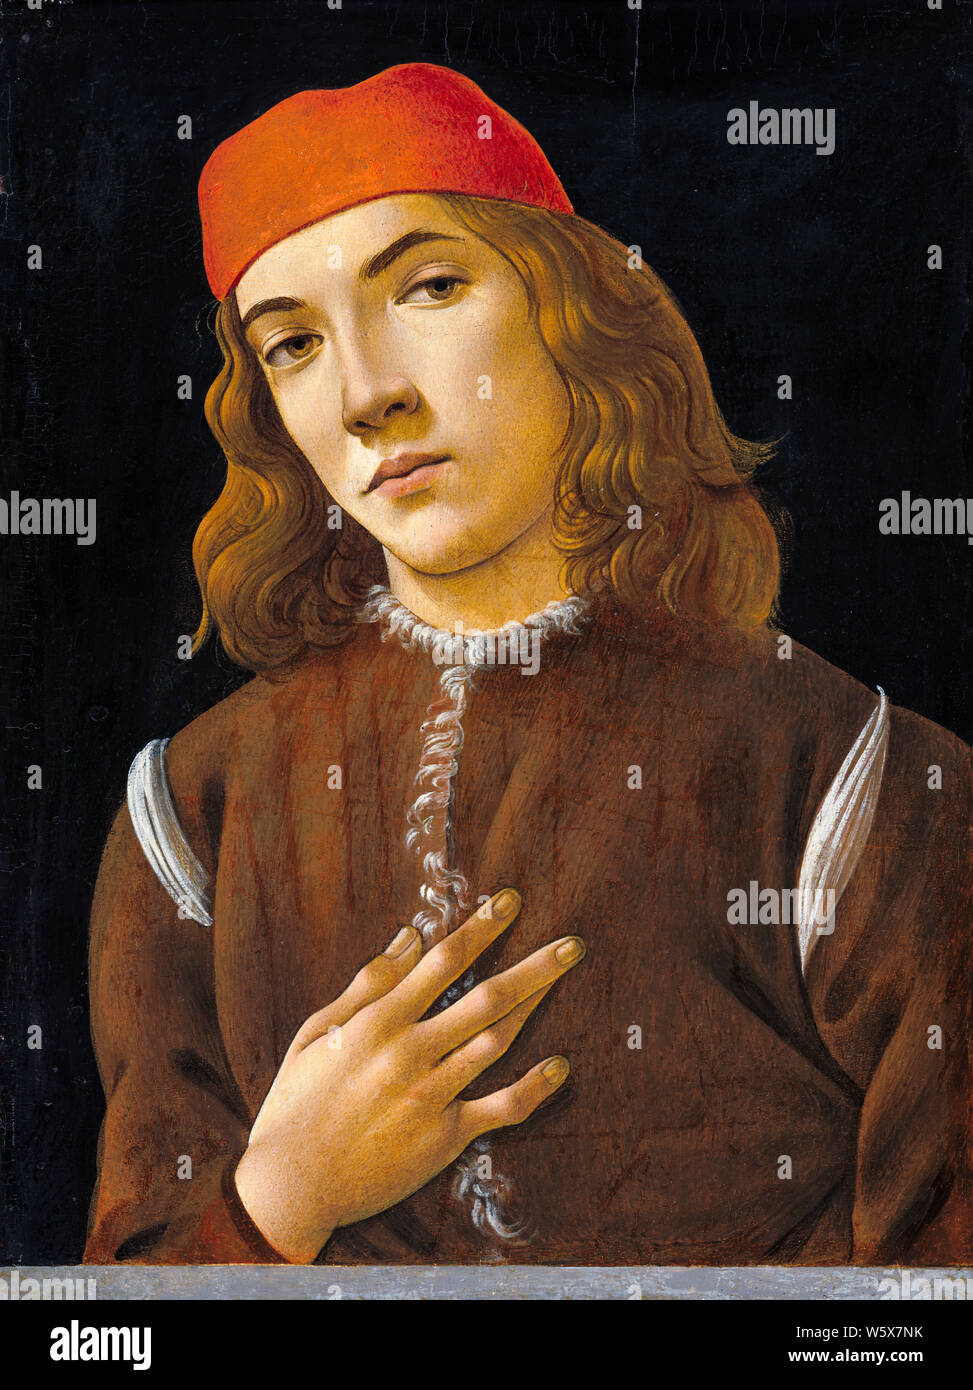 Sandro Botticelli, Portrait of a Youth, painting, 1482-1485 Stock Photo